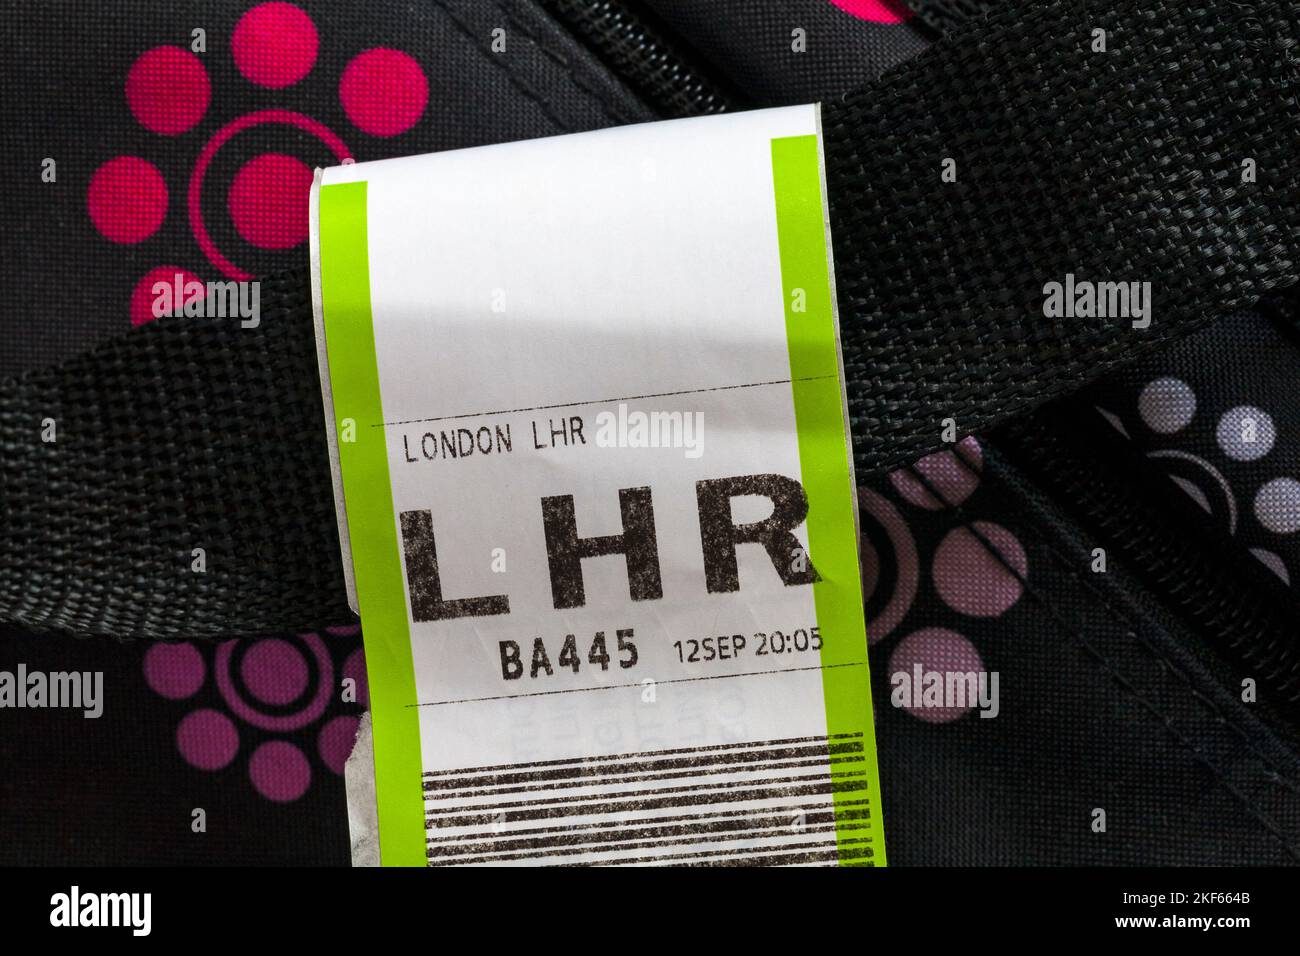 BA British Airways luggage label stuck on luggage for LHR London Heathrow airport in England UK Stock Photo